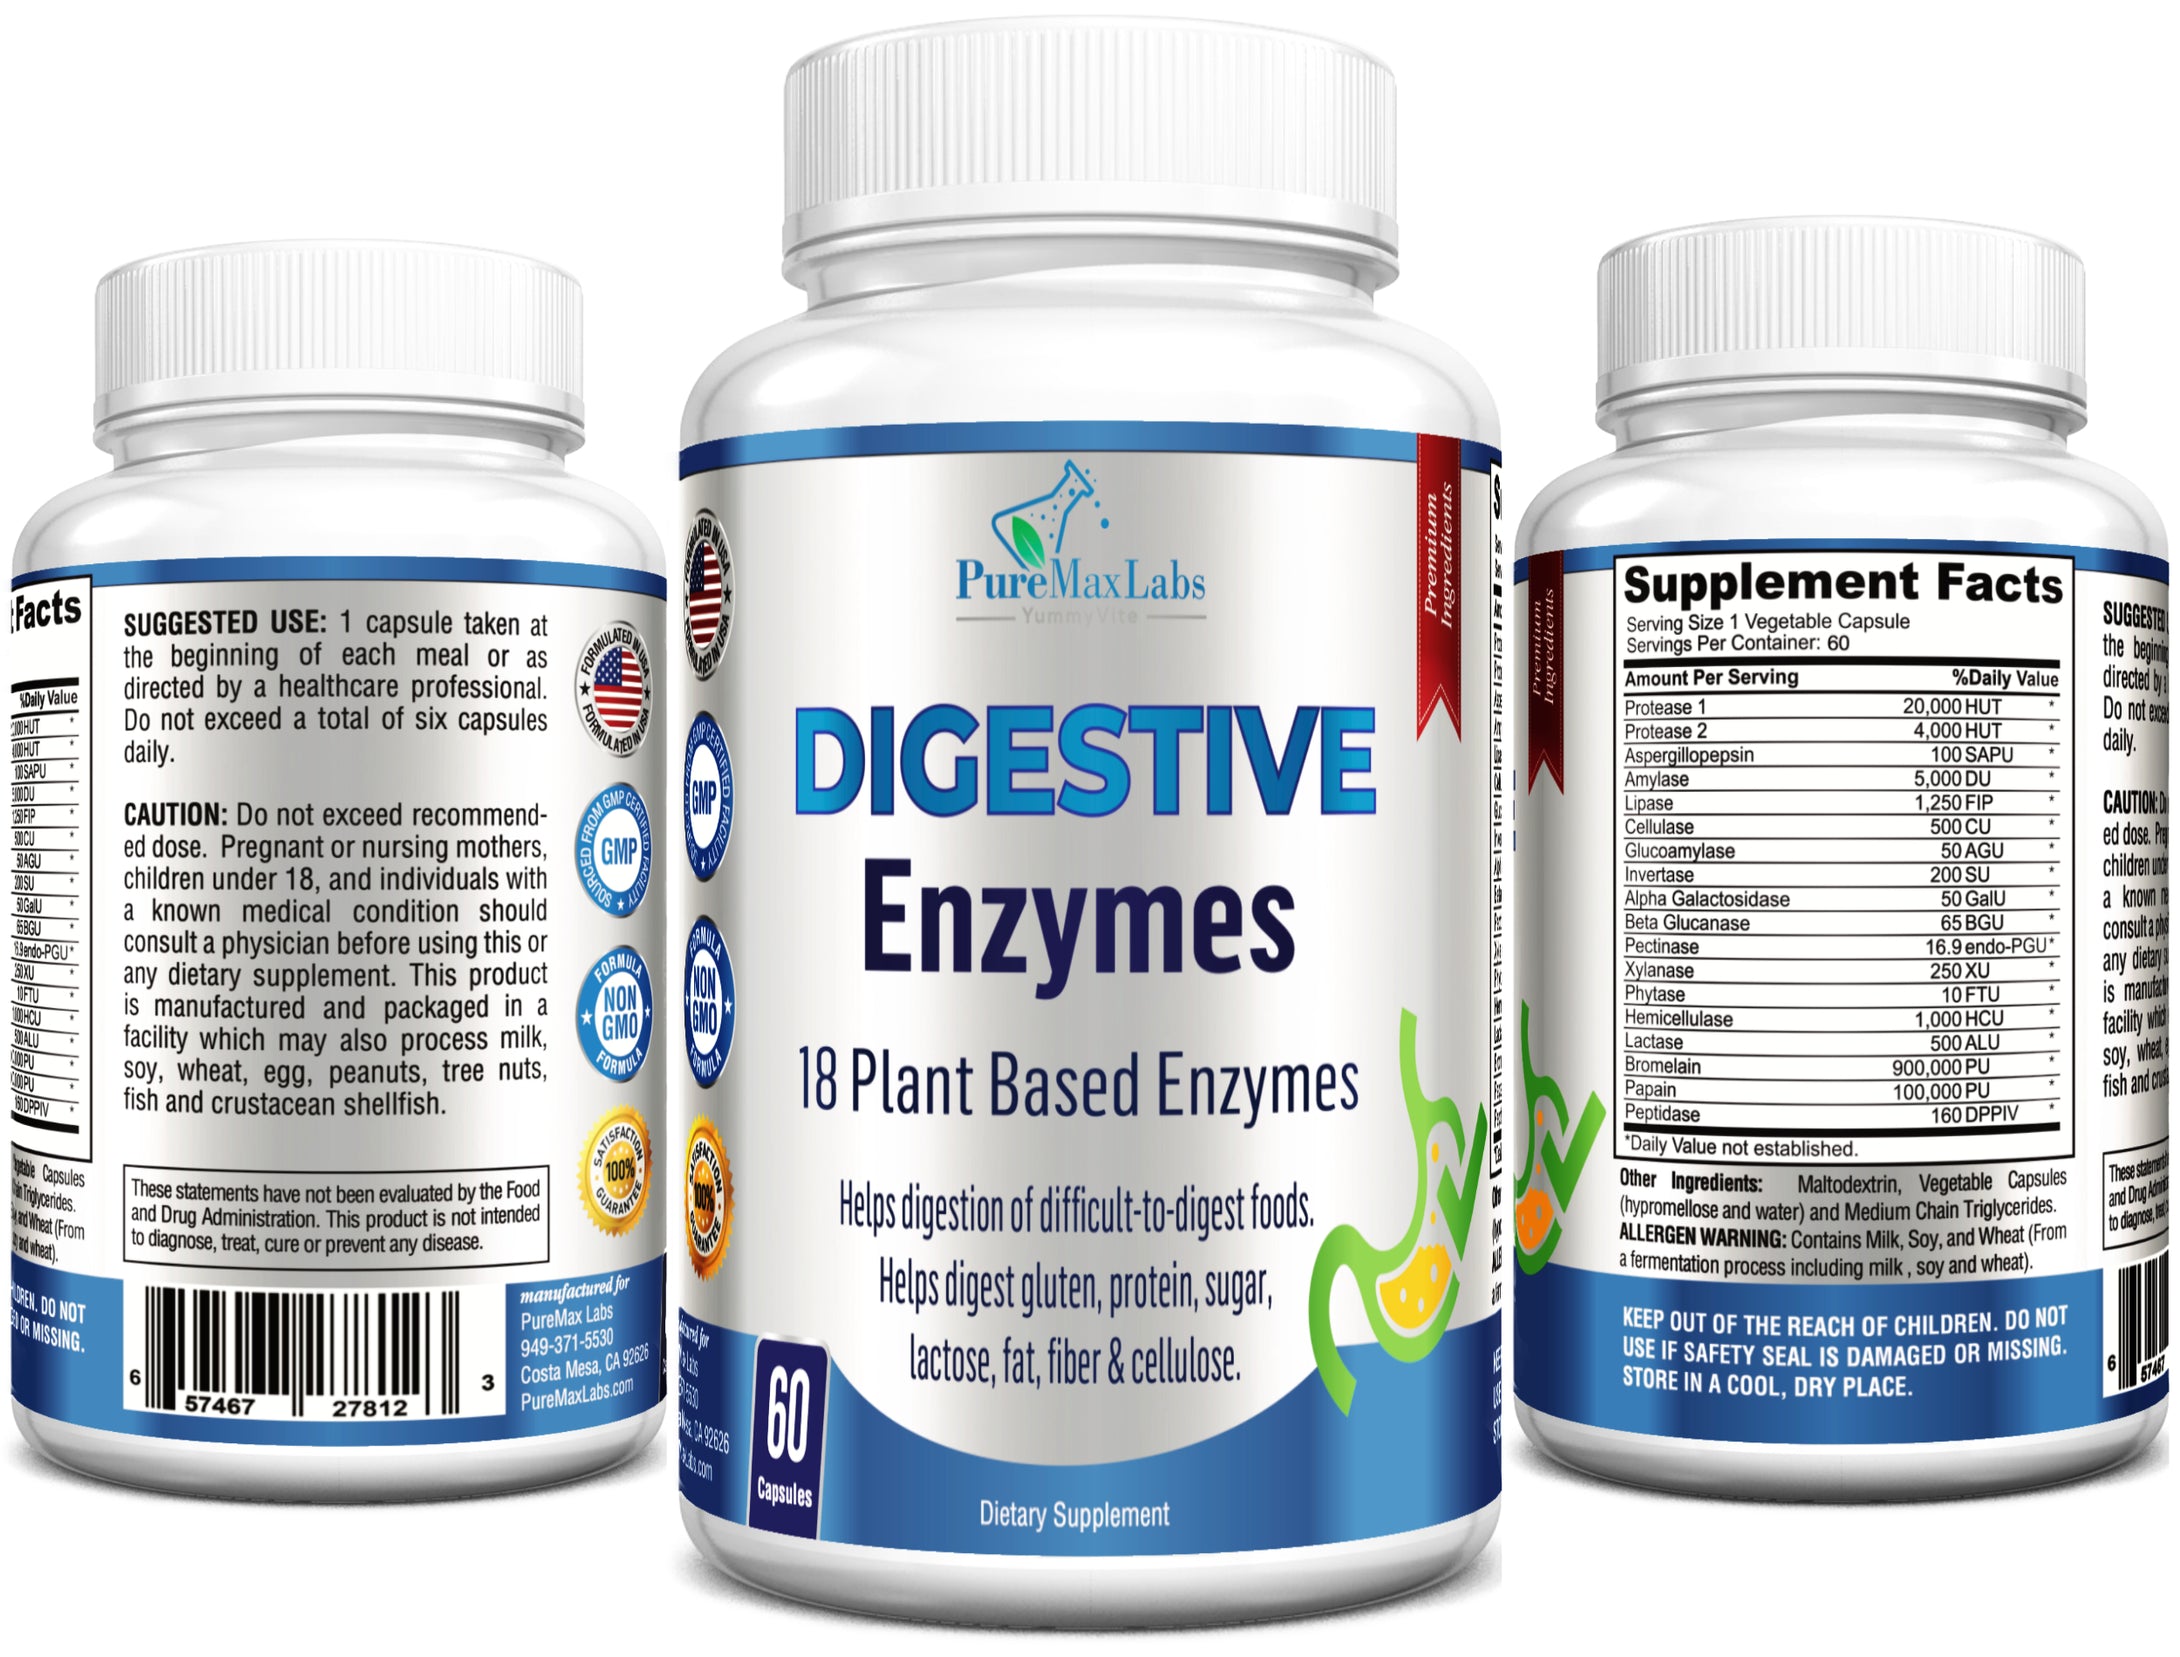 Digestive Enzymes - 18 Plant-Based Enzymes - Helps Digestion of Difficult-to-Digest Foods - 60 Capsules